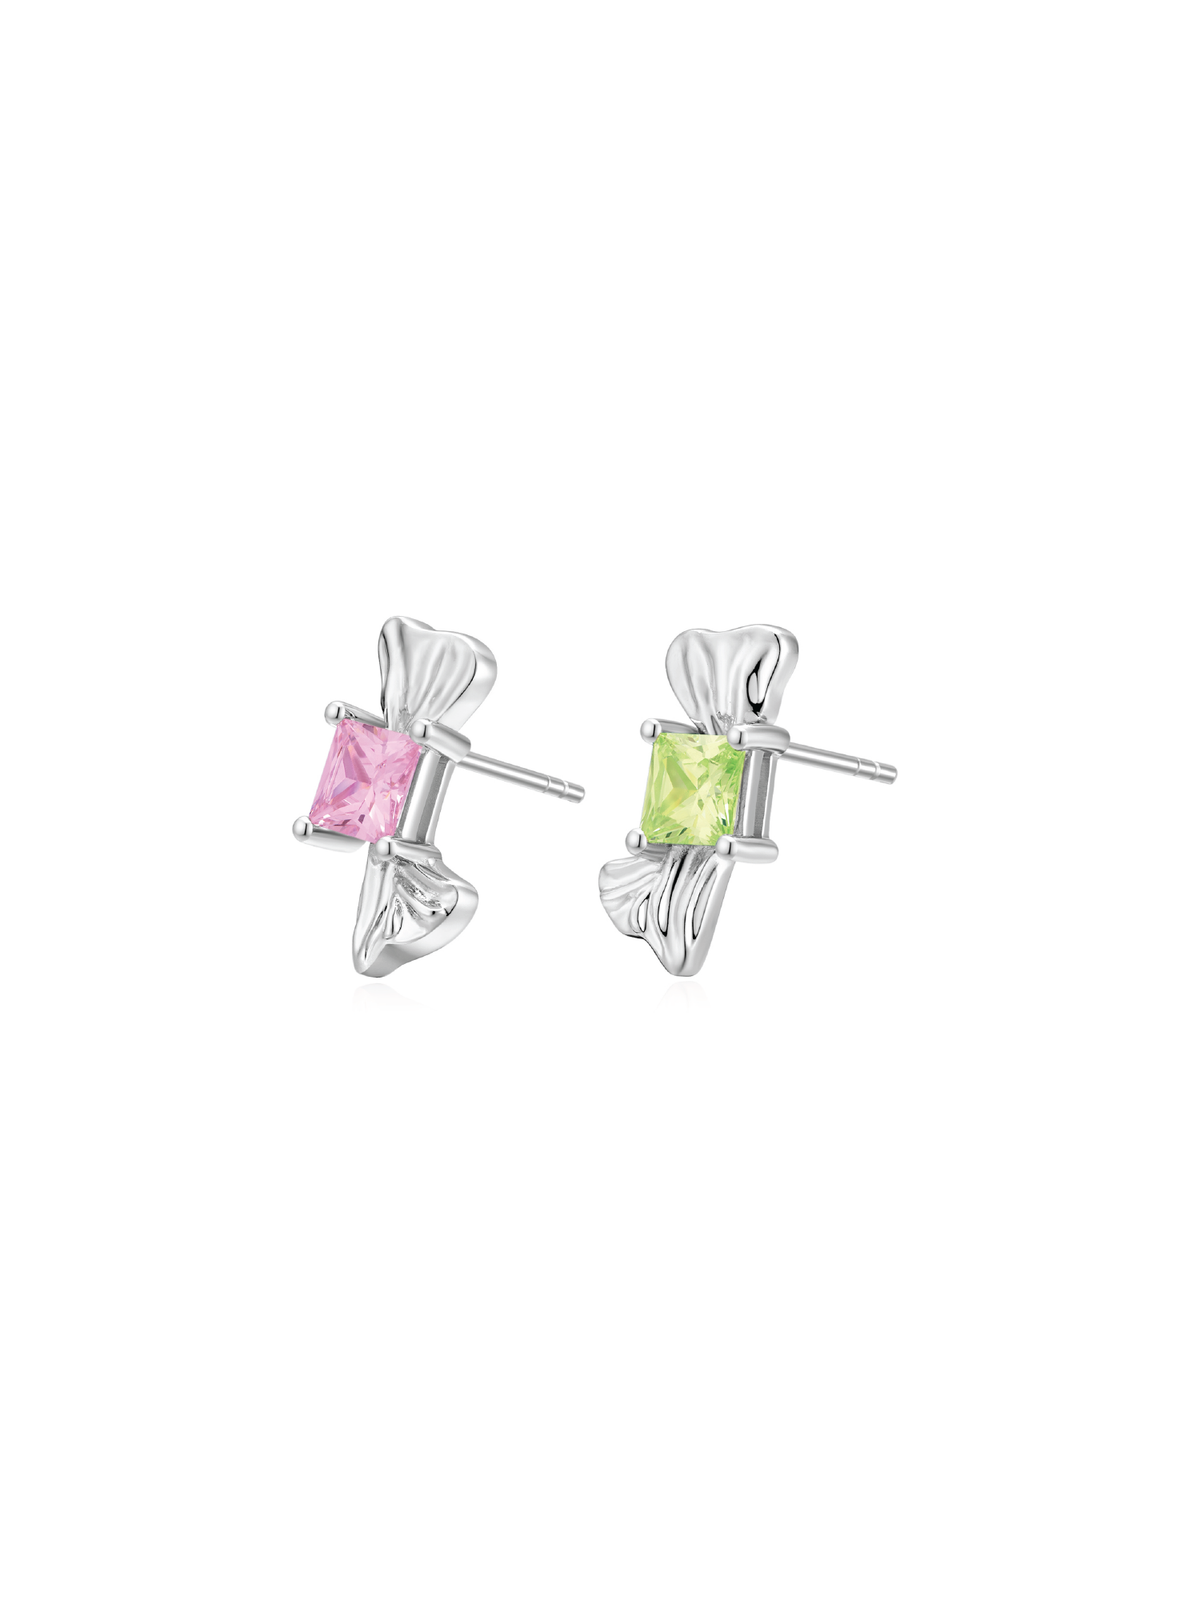 Crystal Candy Earrings (White) (Pair)